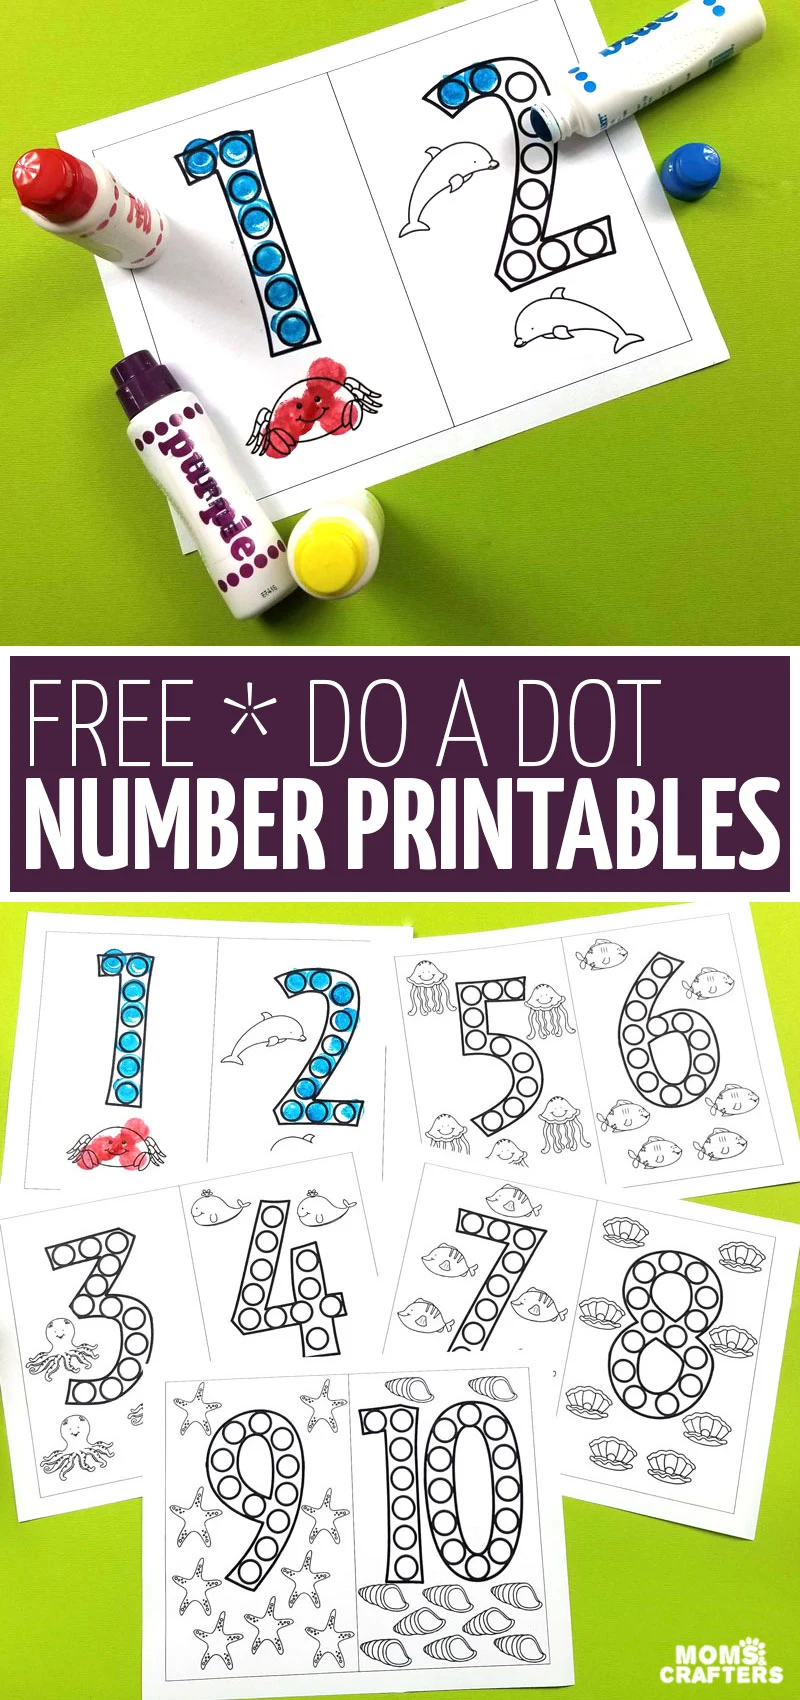 These free do a dot number printables are a great way for kids to have fun learning number forms without worksheets! They're great for at home, for pre-k or kindergarten prep, and a great dot art coloring pages for preschoolers. 